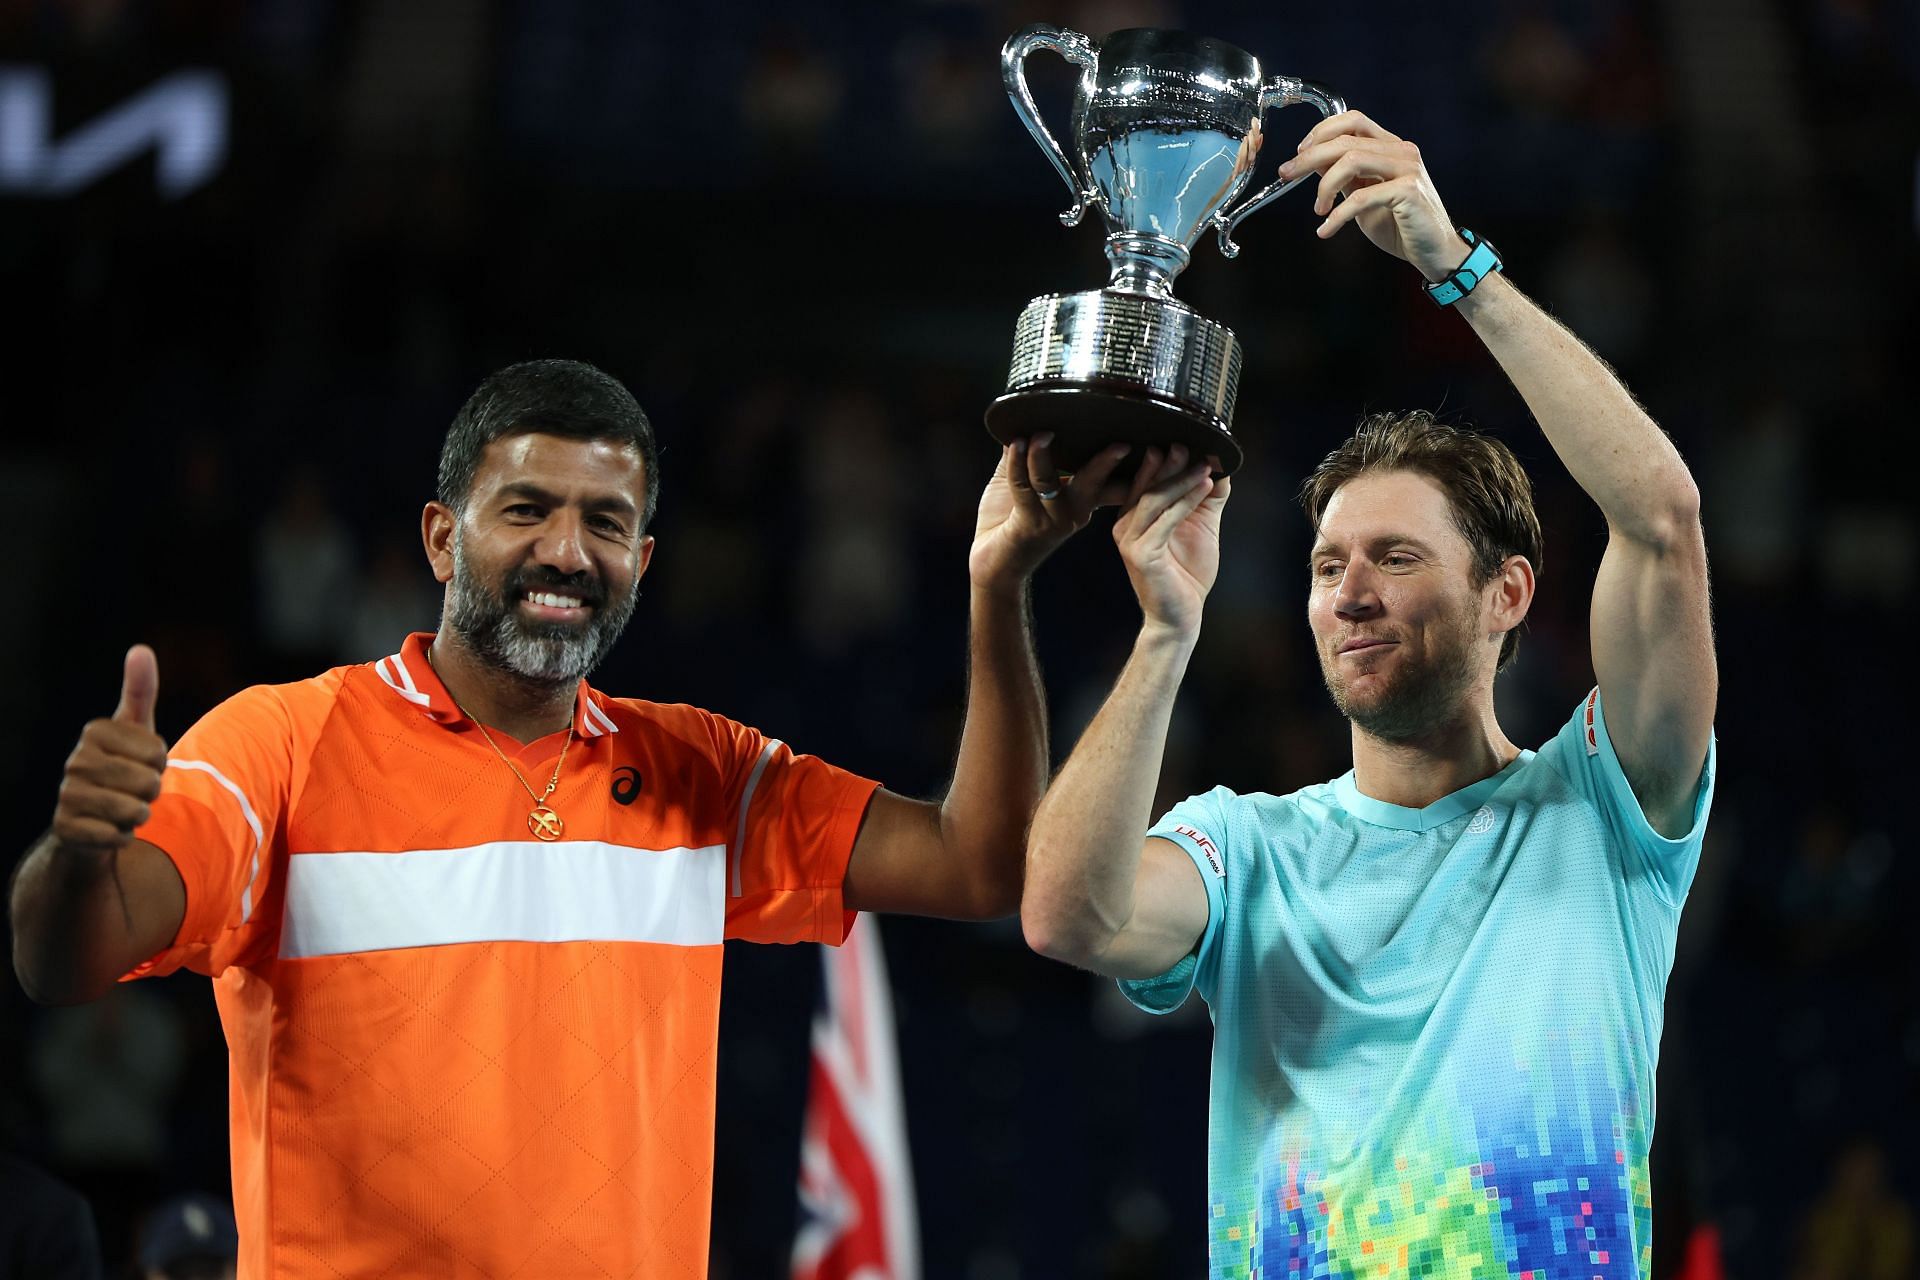 Rohan Bopanna and Matthew Ebden with the men's doubles trophy at the Australian Open